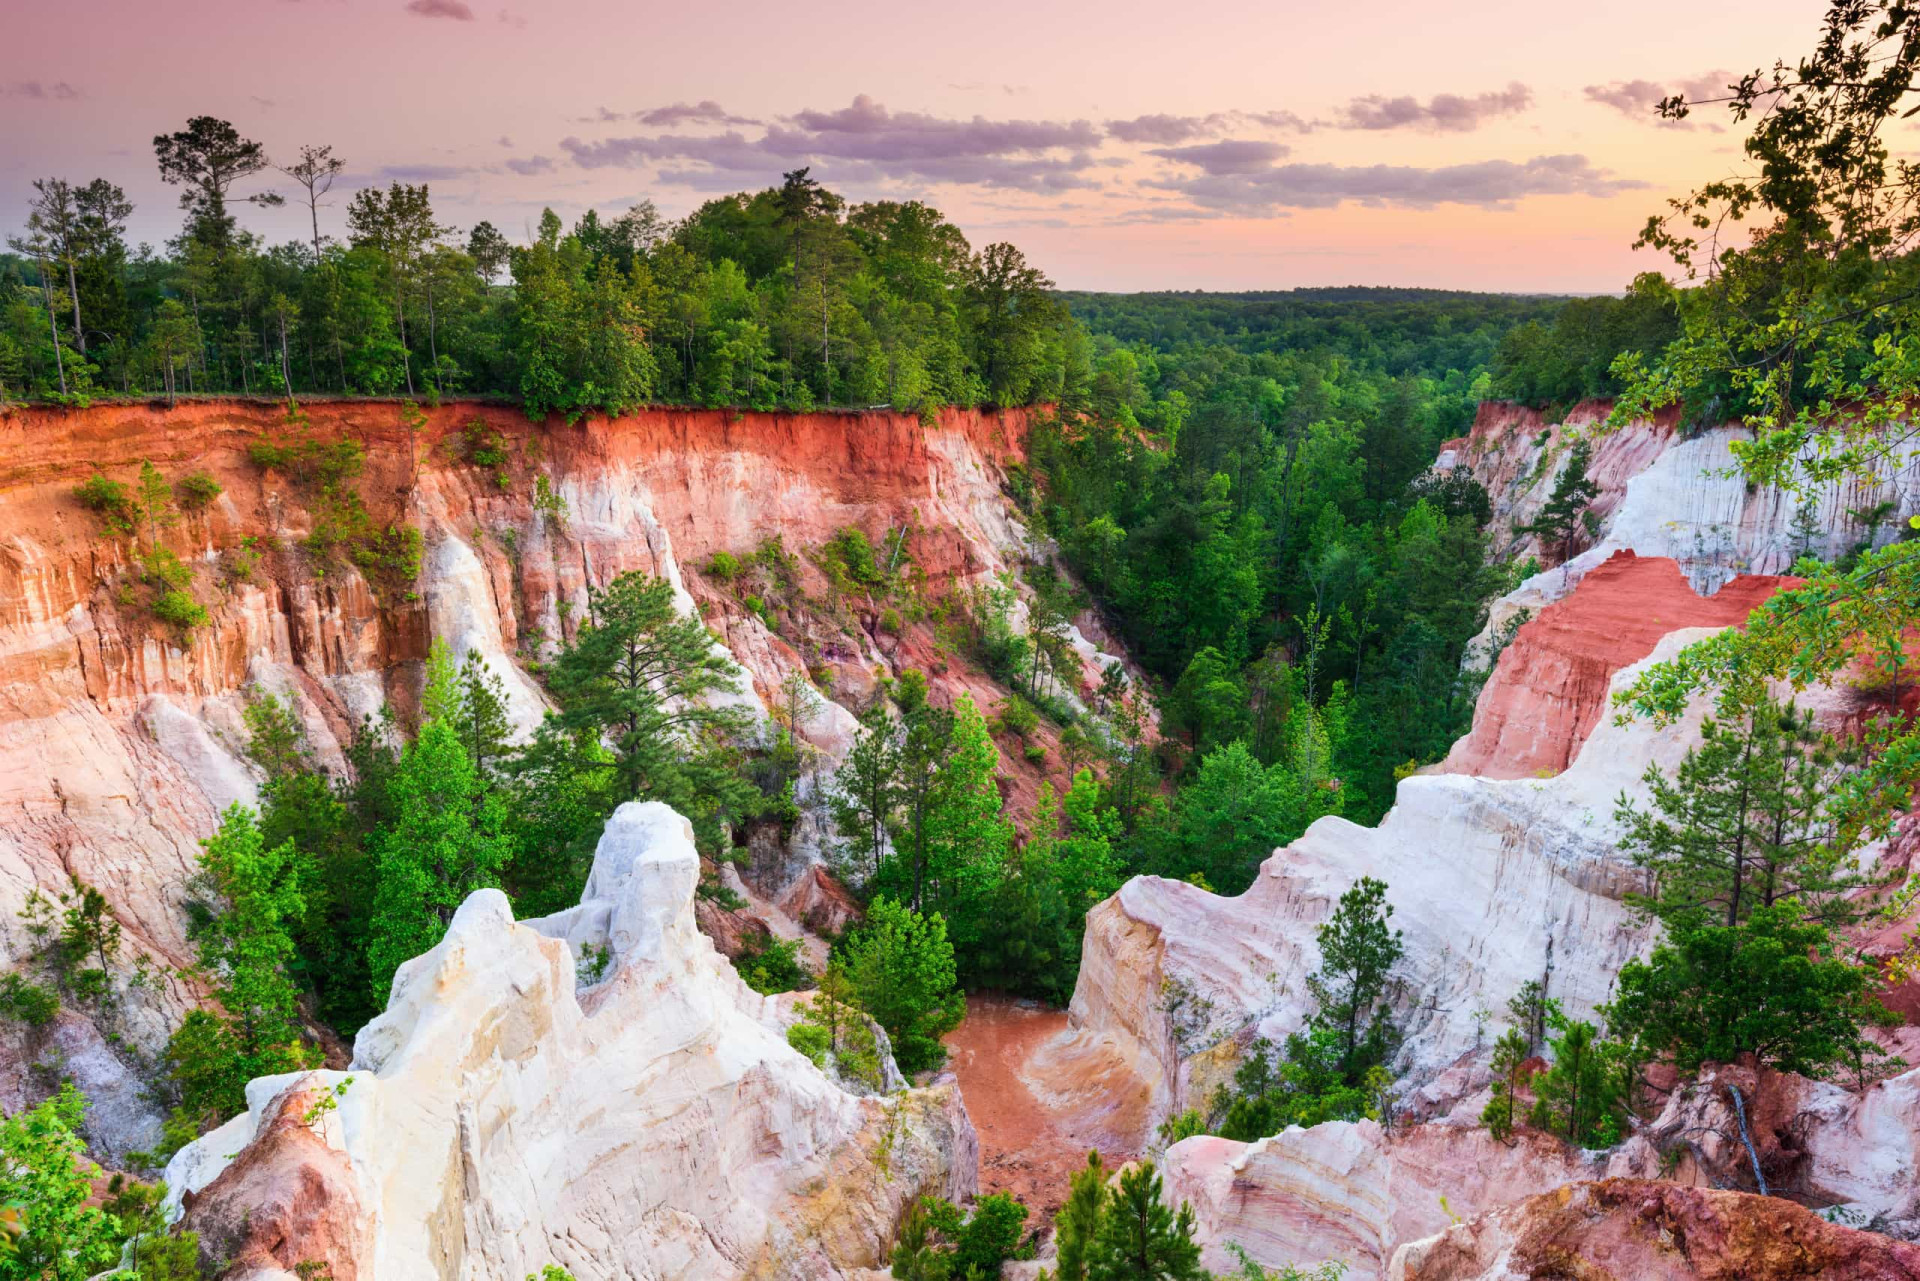 <p>In Stewart County, southwest Georgia, Providence Canyon State park is another site of astonishing natural beauty. The canyon itself is often referred to as the "Little Grand Canyon," and a series of trails and overlooks provide ample opportunity to take in its grand scale.</p><p><a href="https://www.msn.com/en-us/community/channel/vid-7xx8mnucu55yw63we9va2gwr7uihbxwc68fxqp25x6tg4ftibpra?cvid=94631541bc0f4f89bfd59158d696ad7e">Follow us and access great exclusive content every day</a></p>